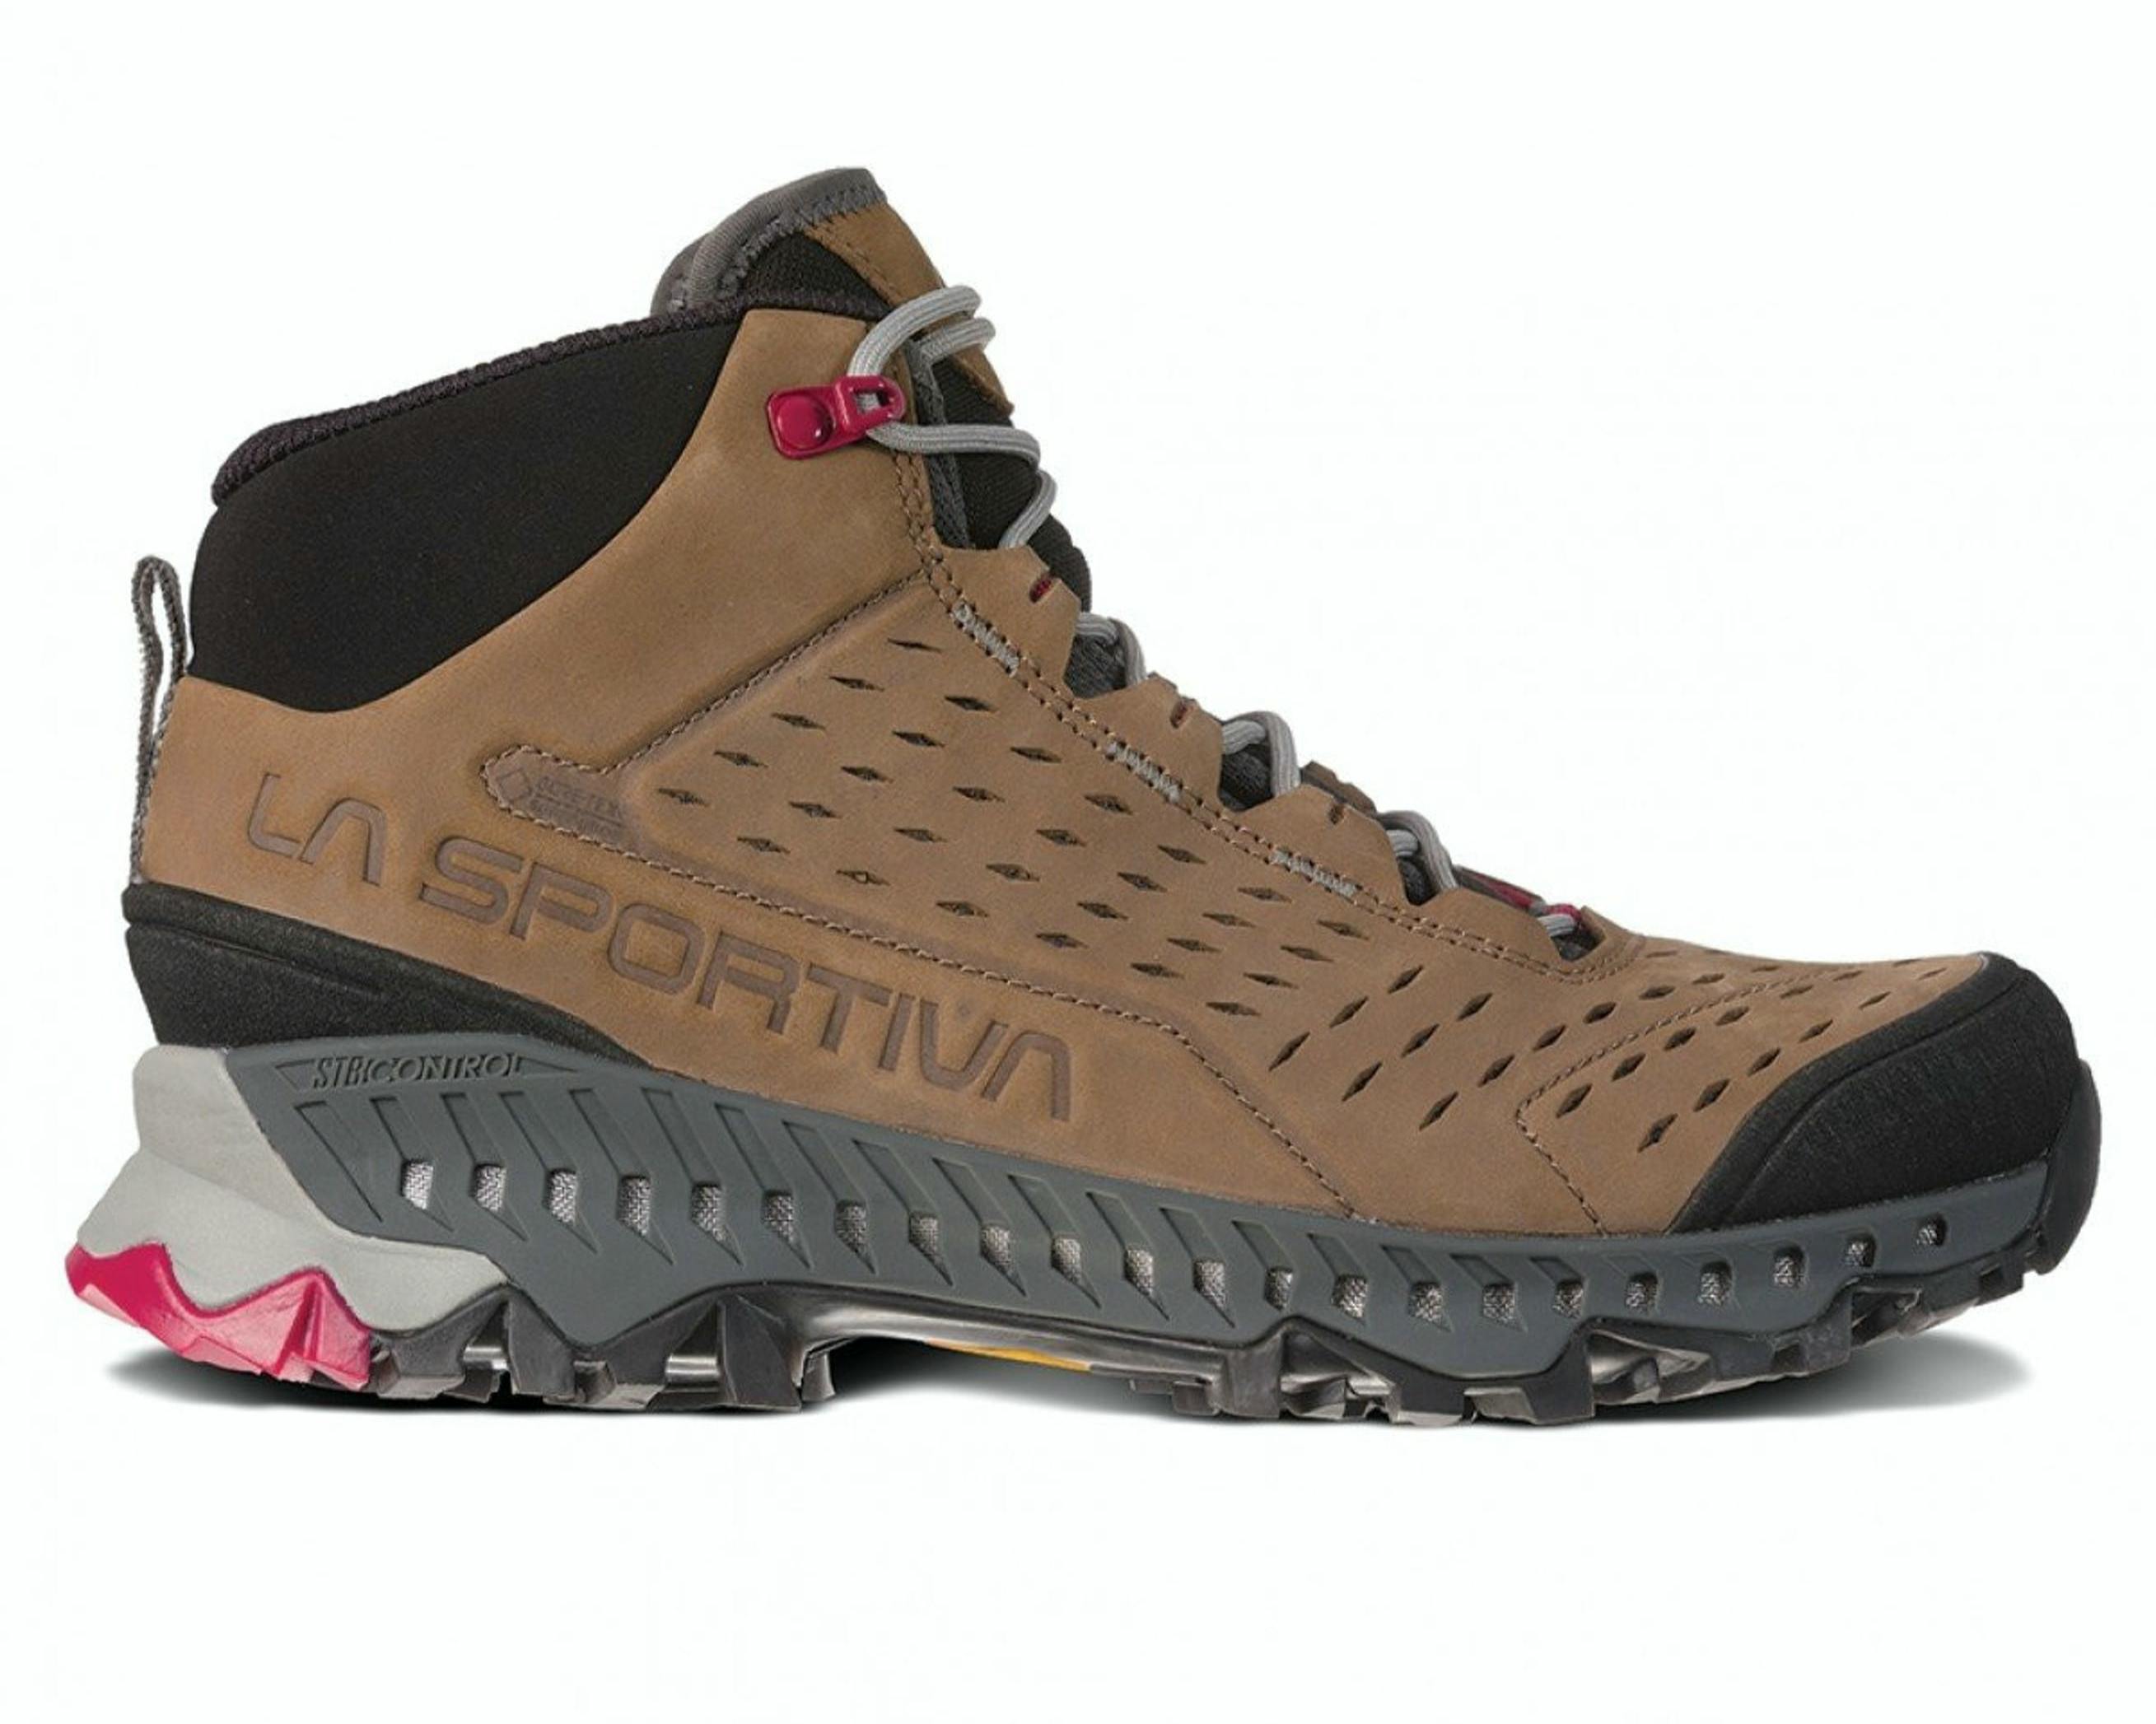 Product image of the La Sportiva Pyramid GTX Women’s Boots.